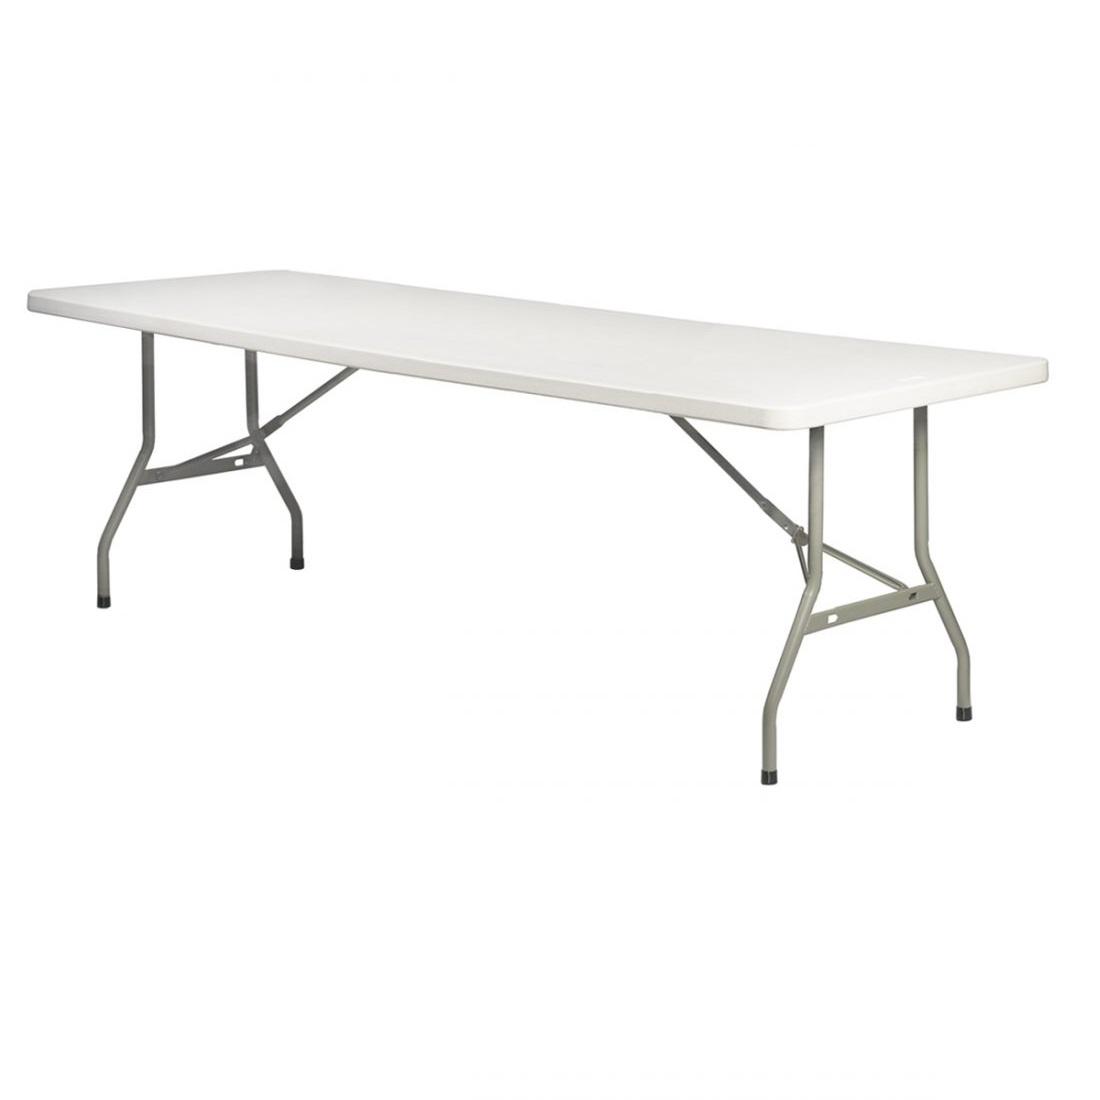 Party Rentals Miami, 8' Rectangle Table, Table and Tent Rentals